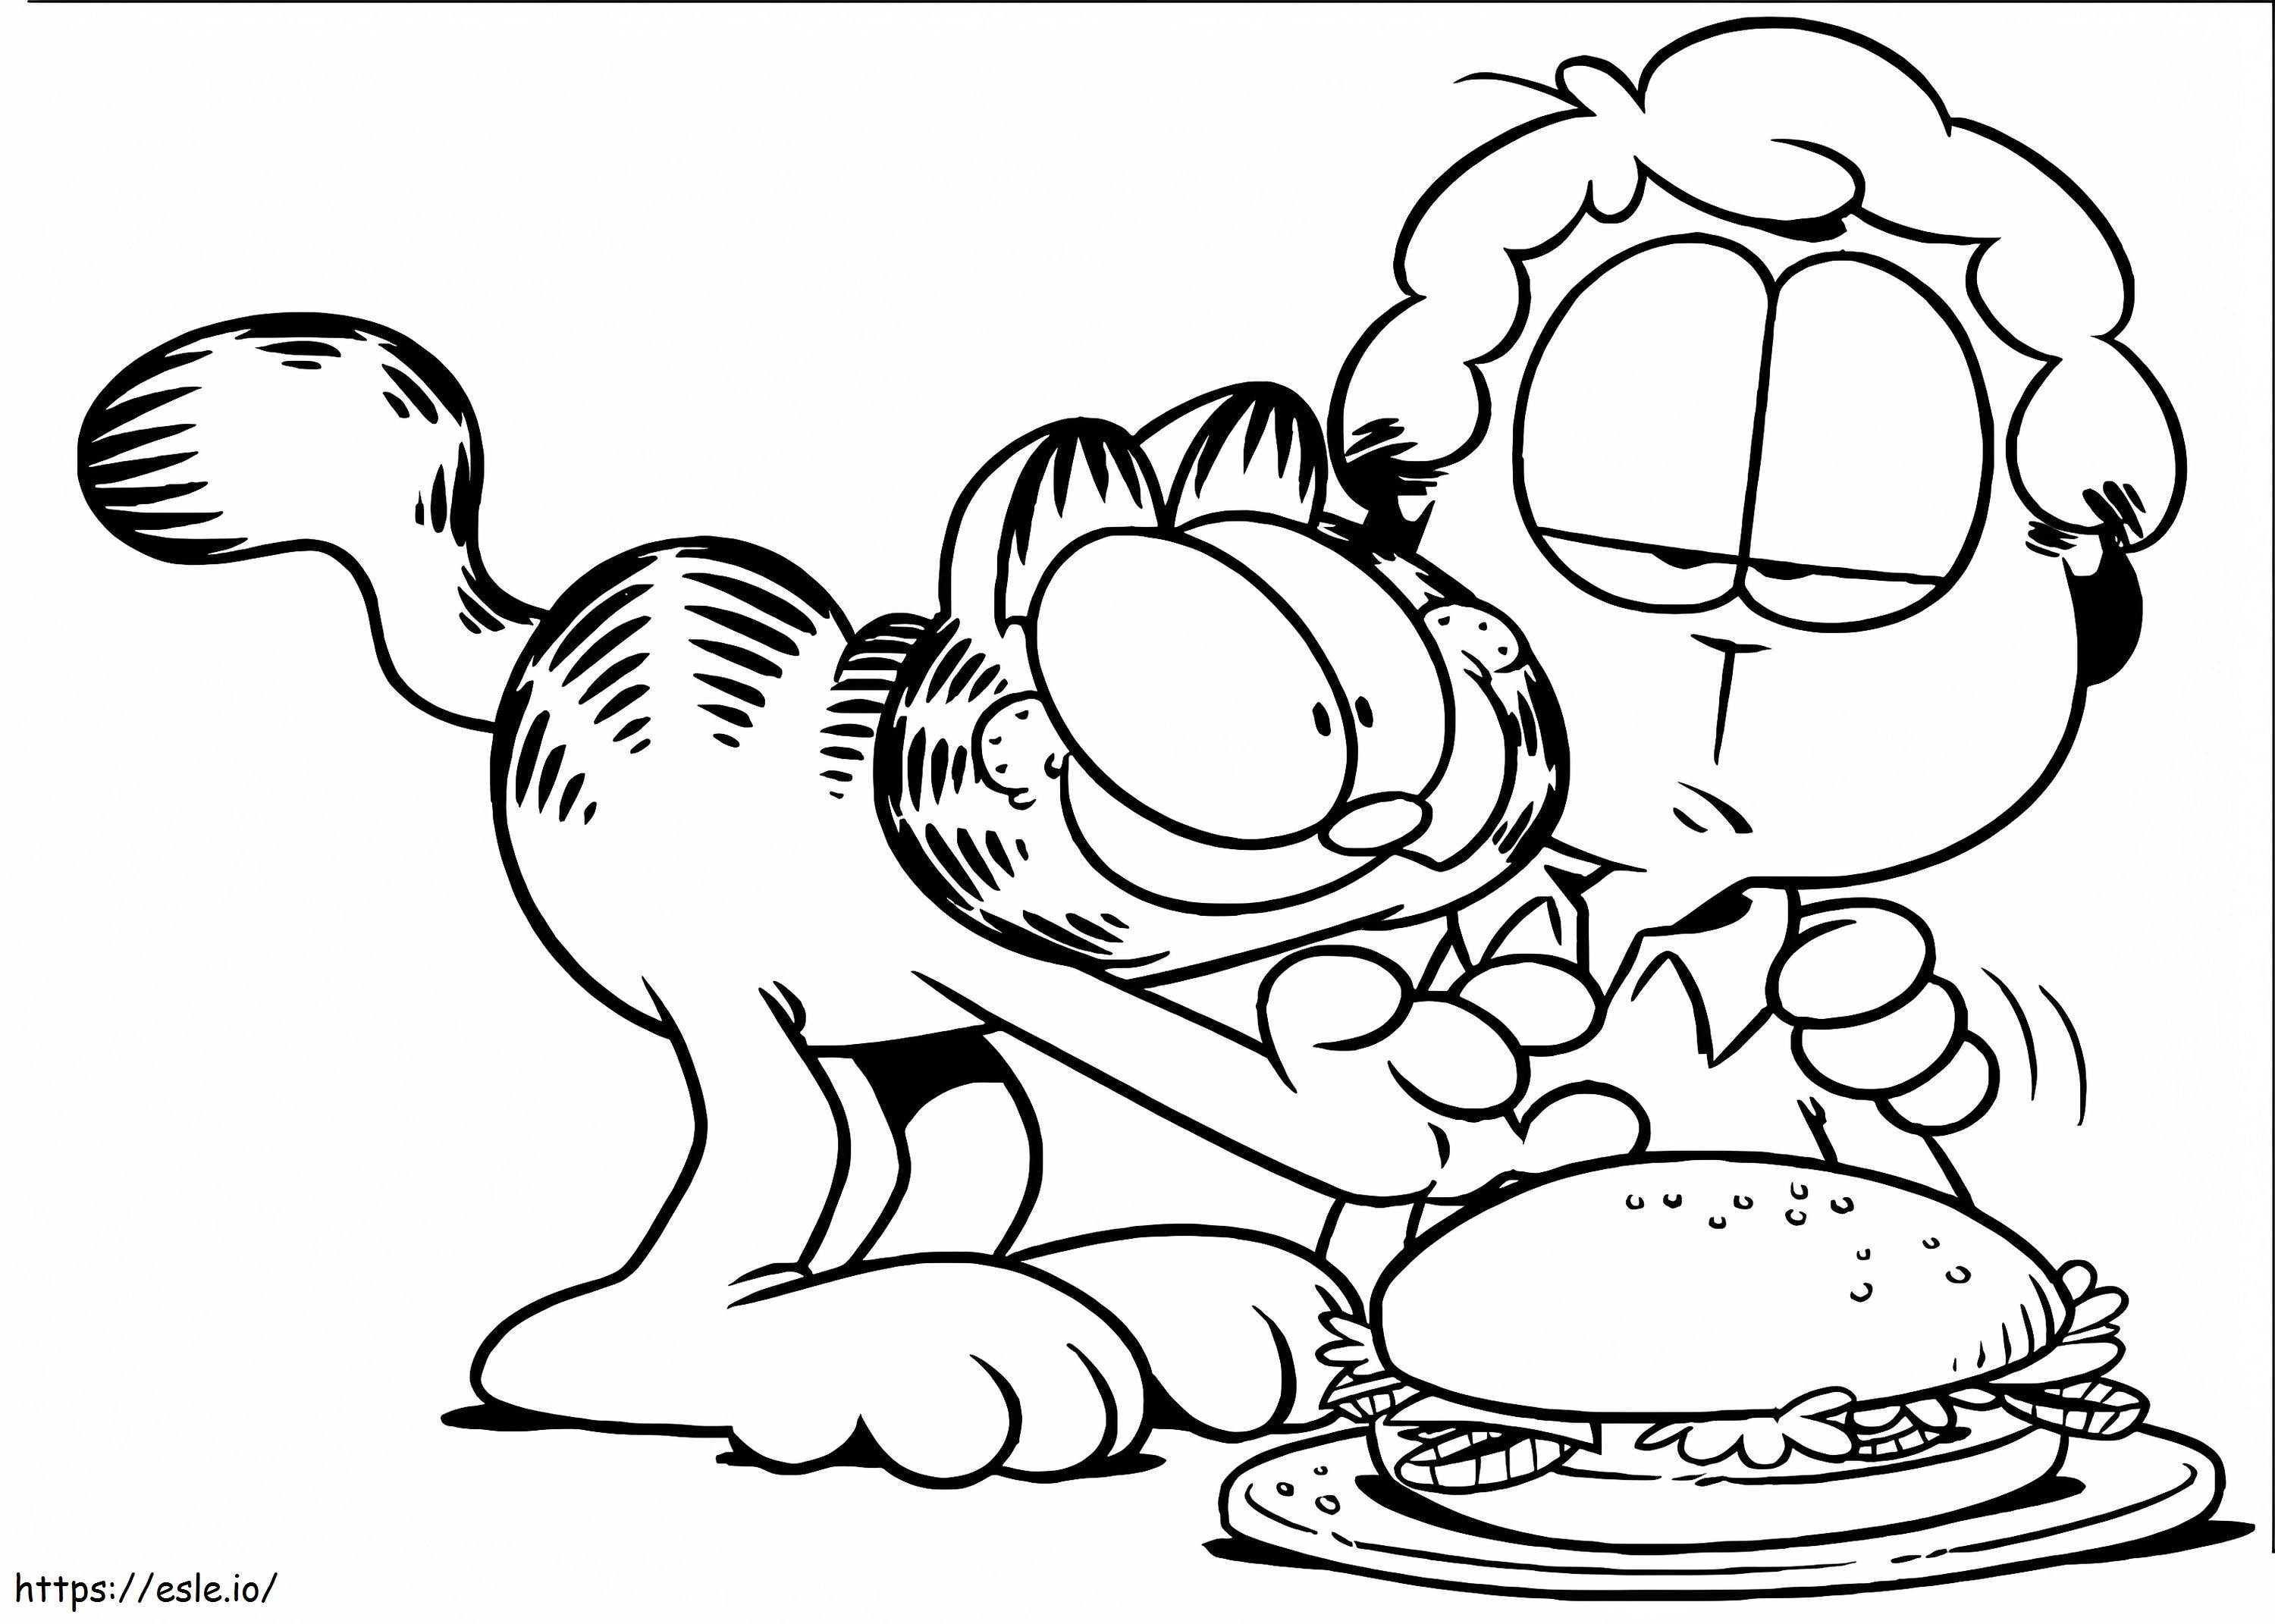 Naughty Garfield And Friend With Hamburger coloring page